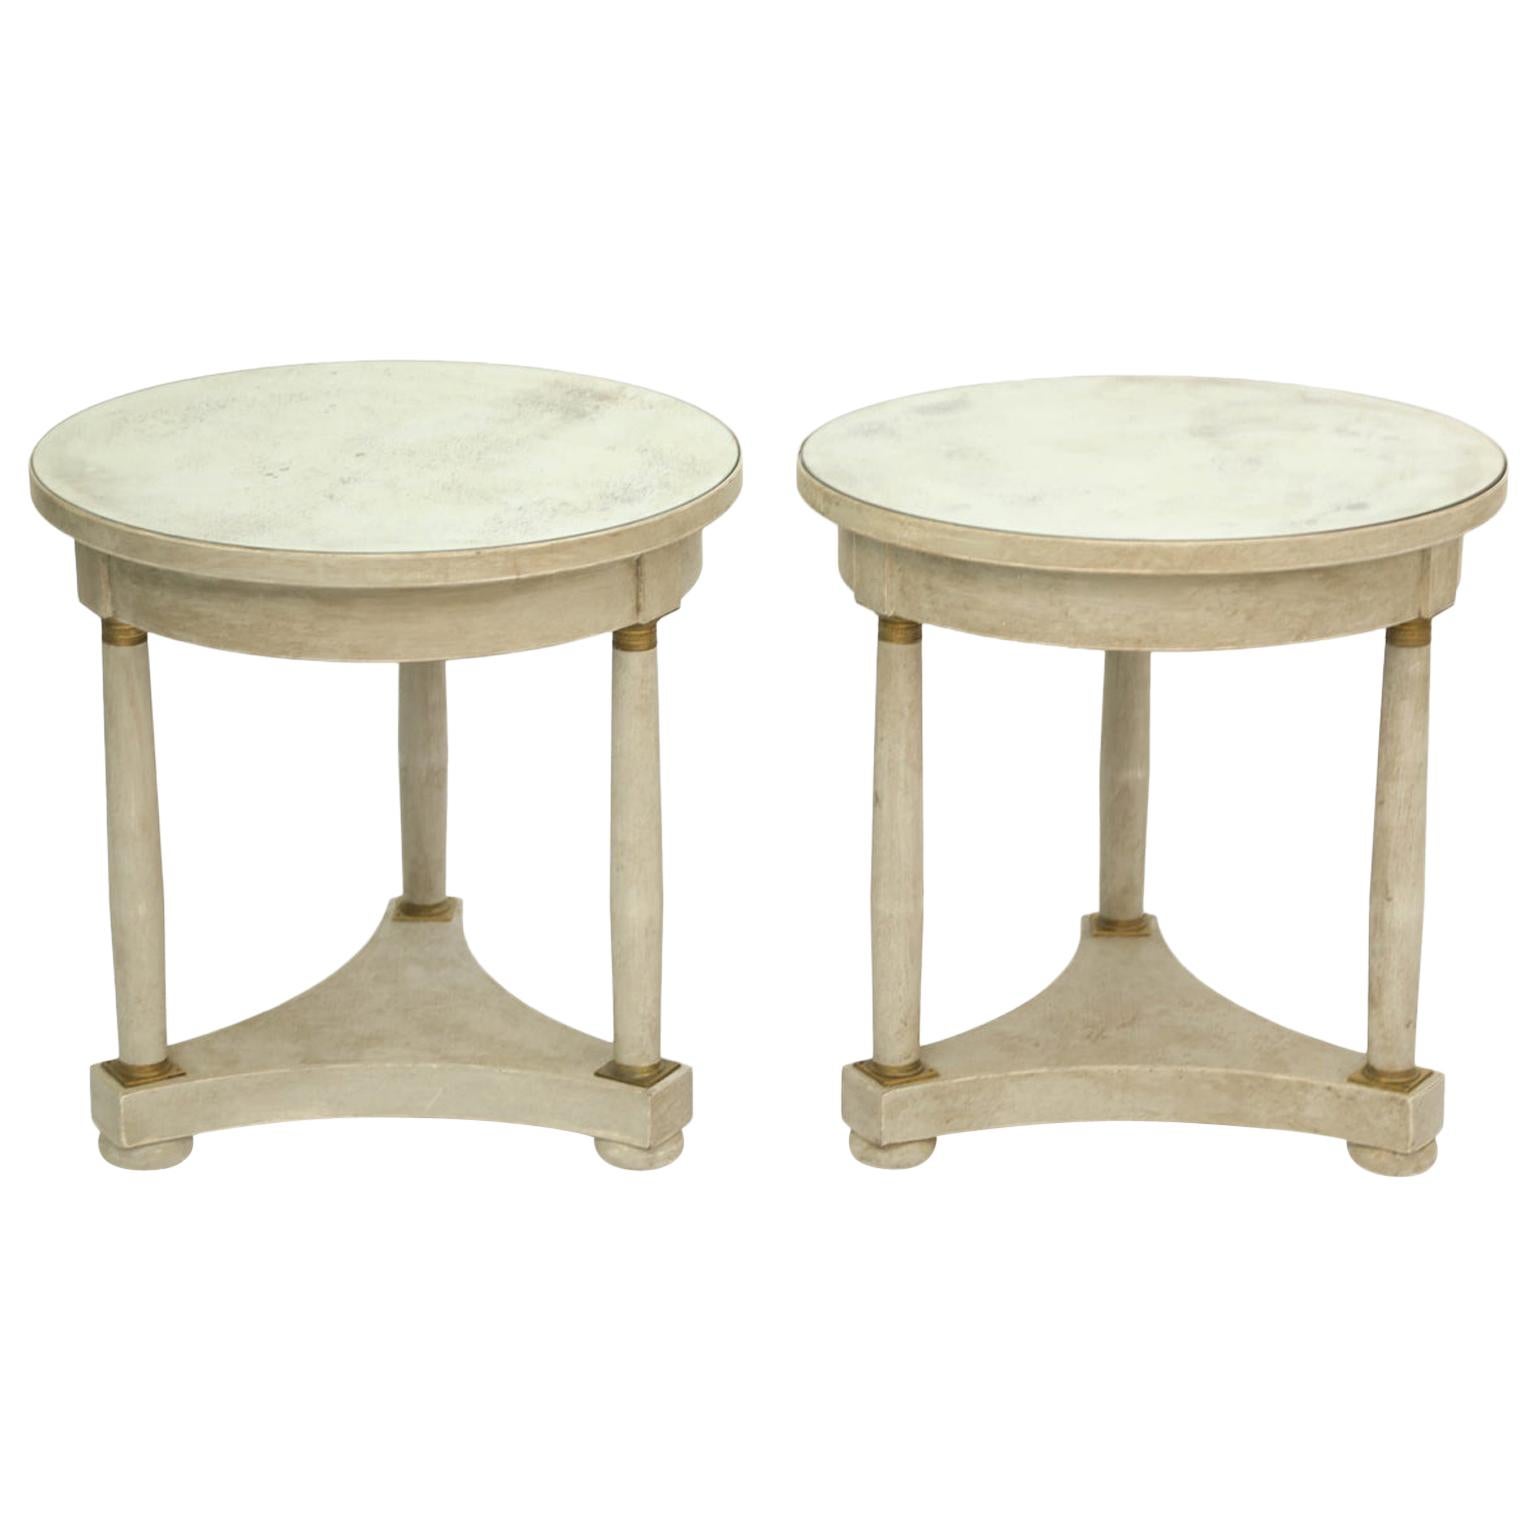 Pair of Empire Form Painted End Tables with Mirrored Tops